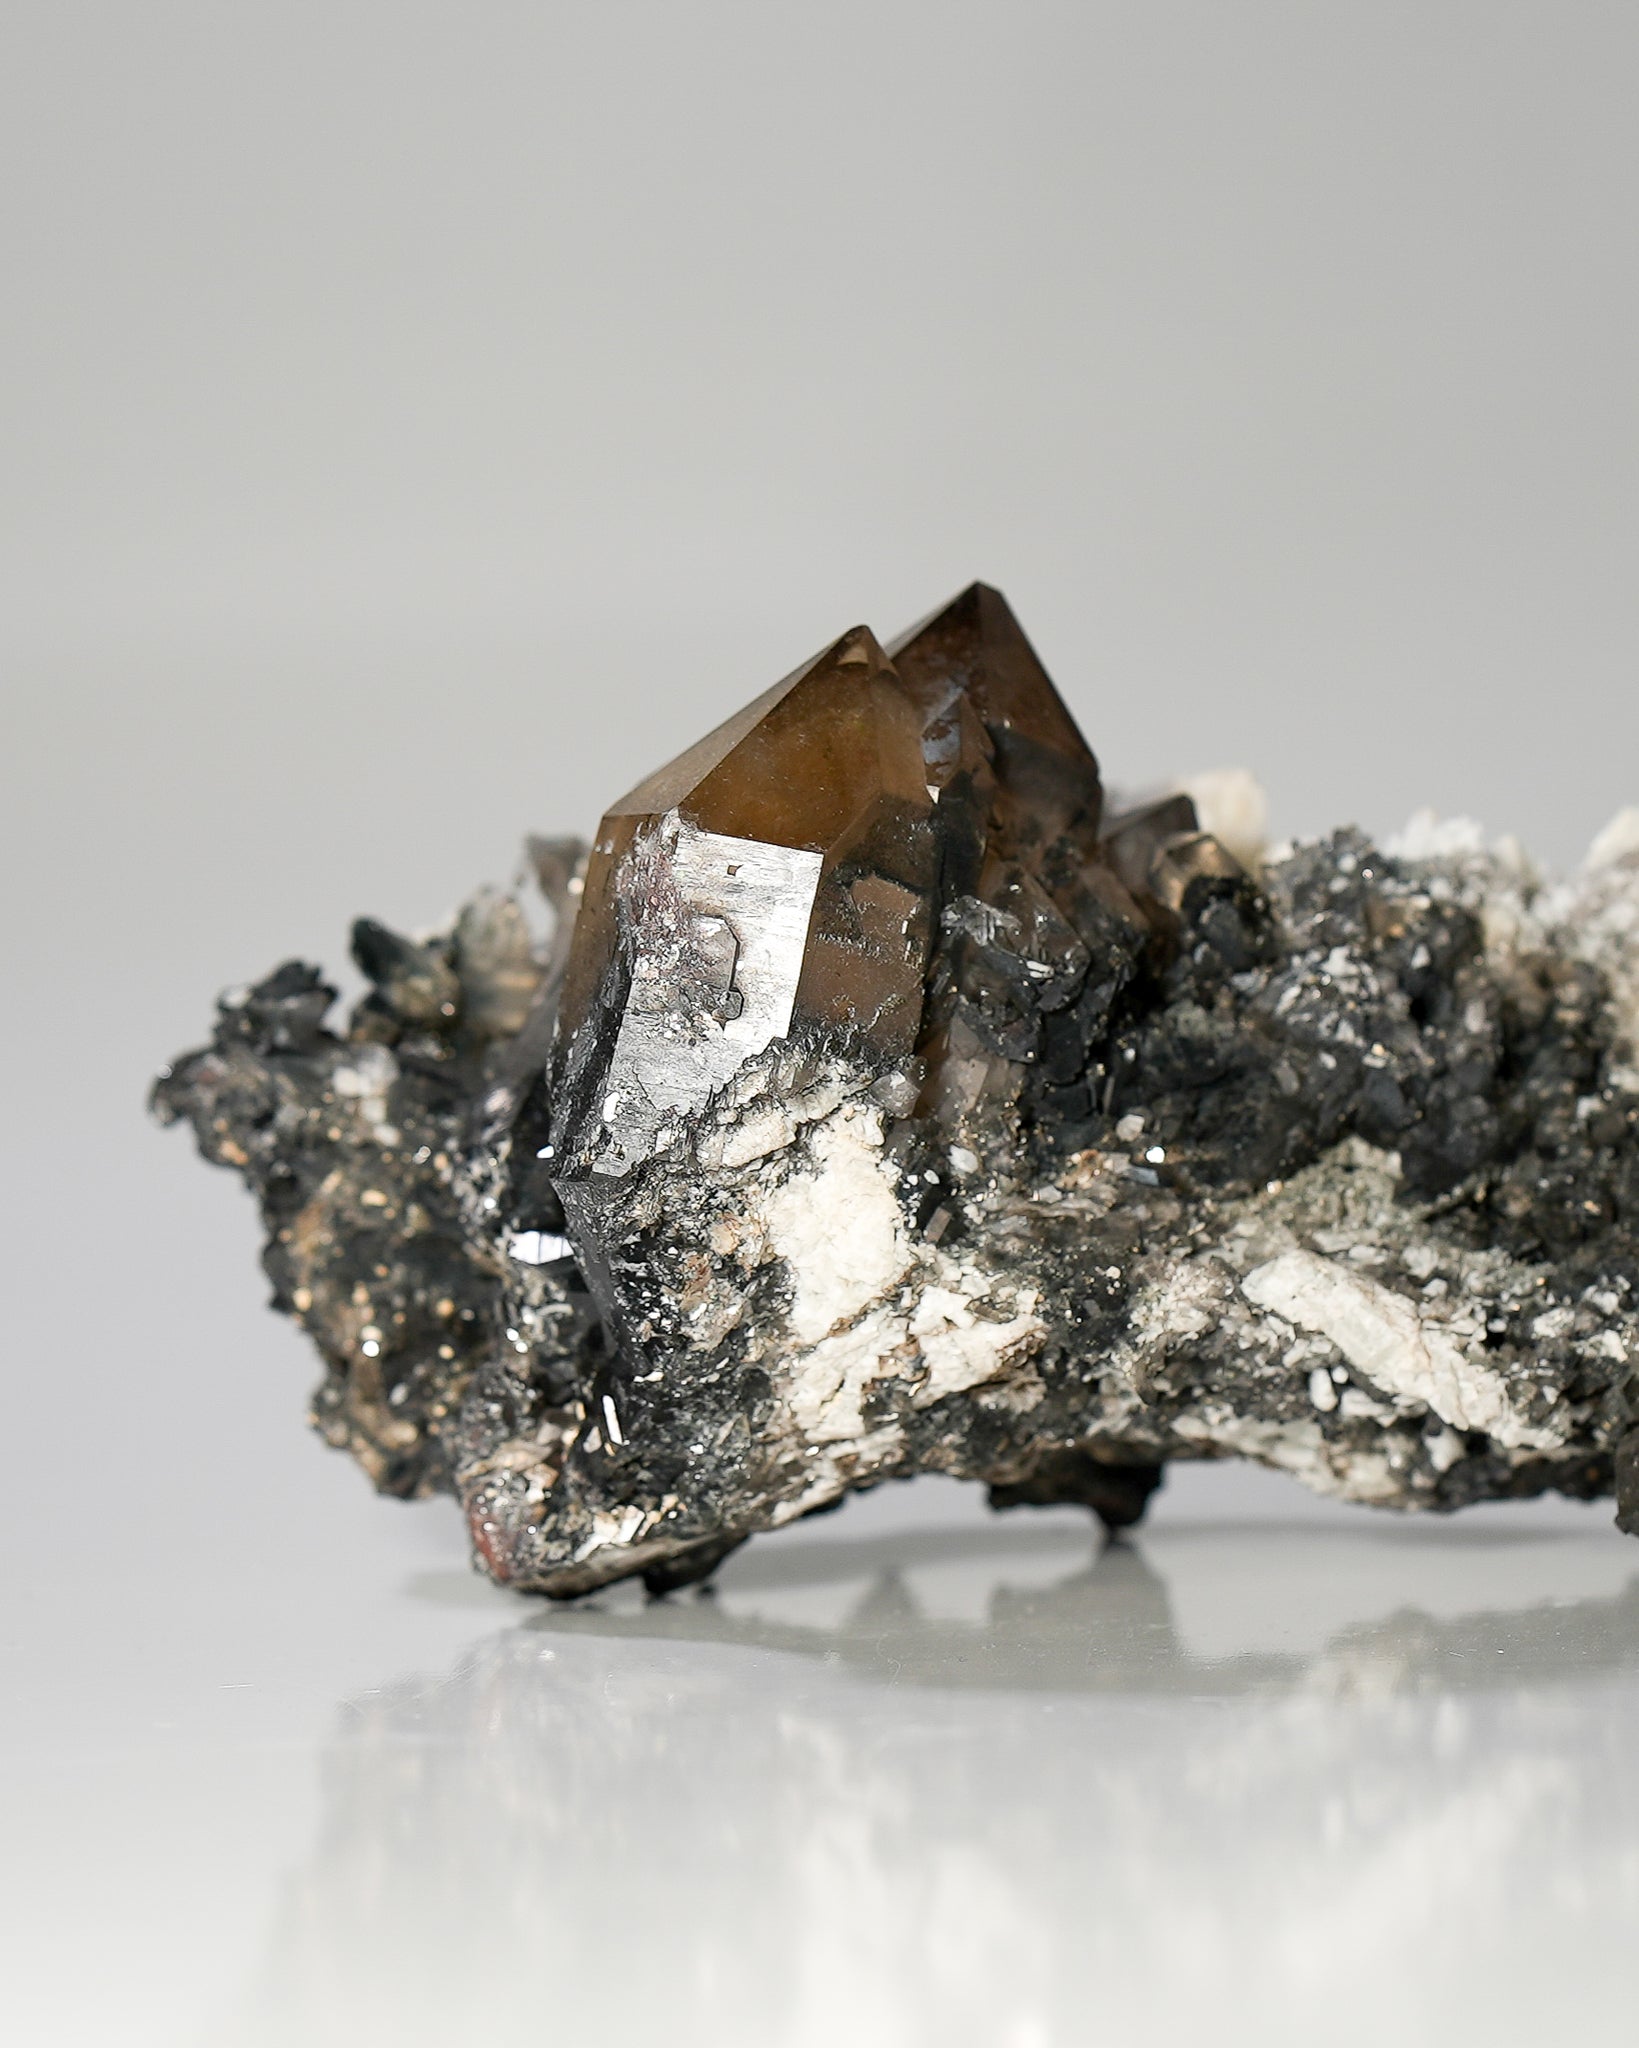 Smokey Quartz Included by Schorl Tourmaline with Albite and Muscovite